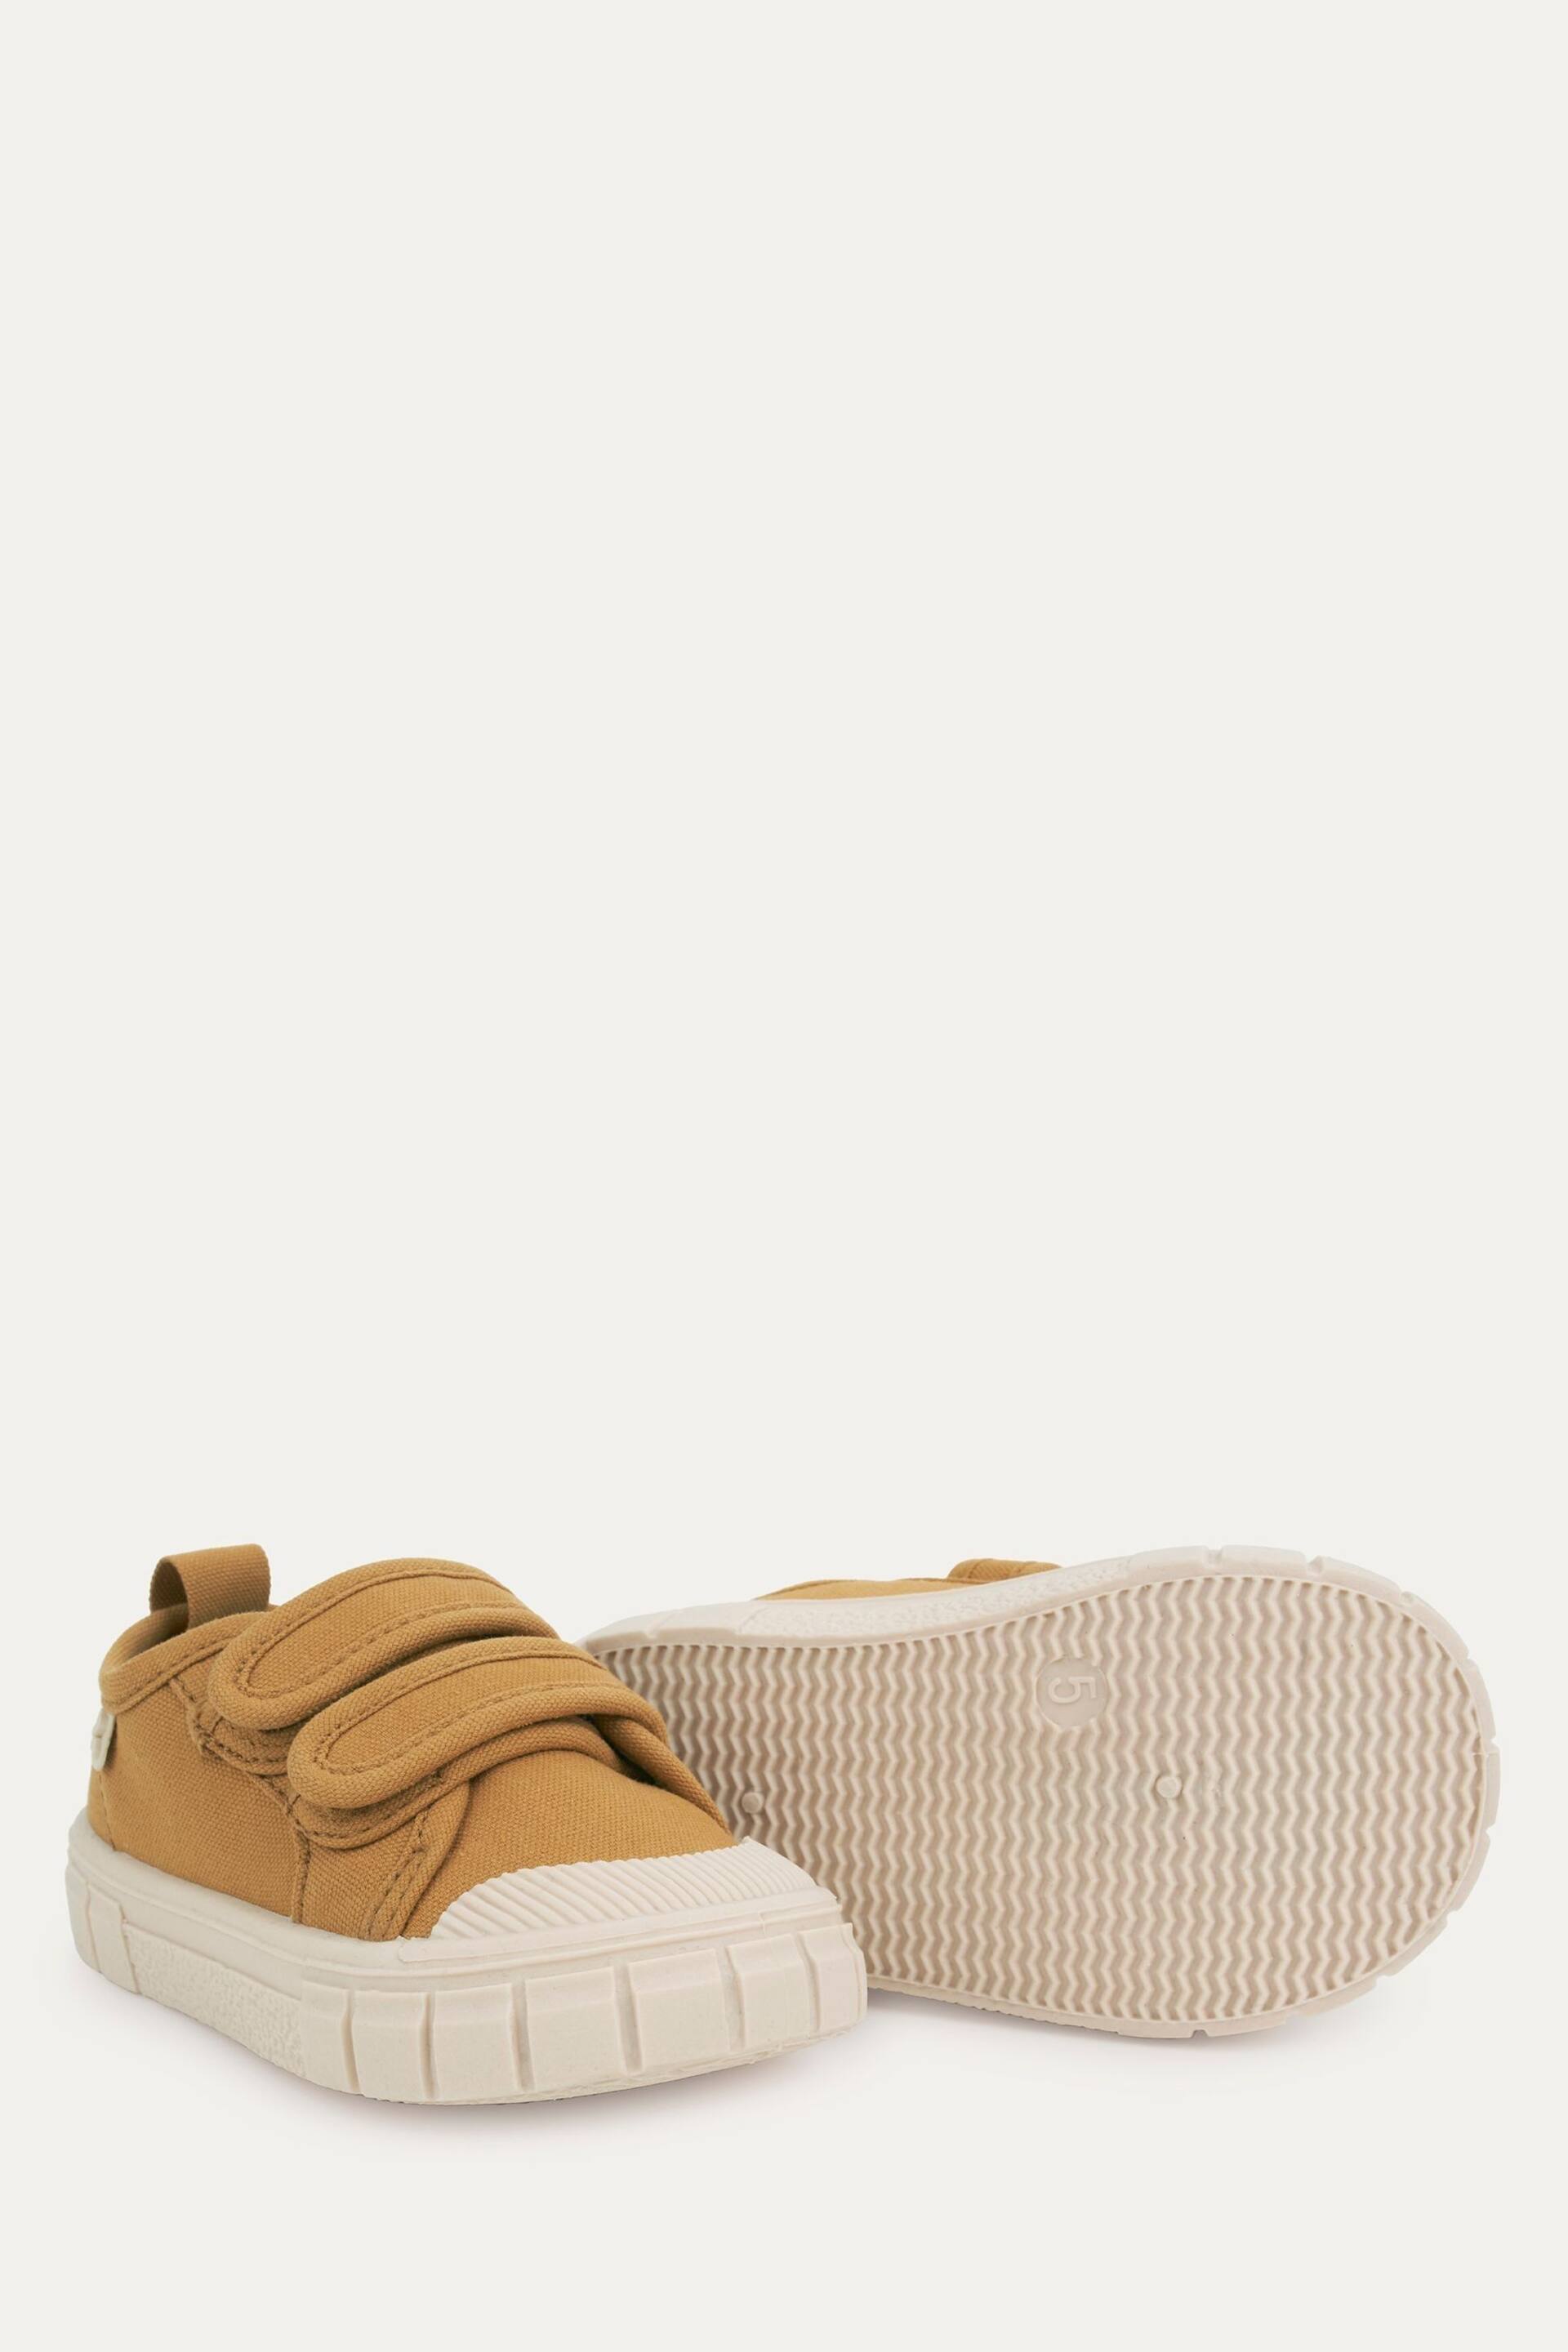 KIDLY Plain Canvas Trainers - Image 4 of 4